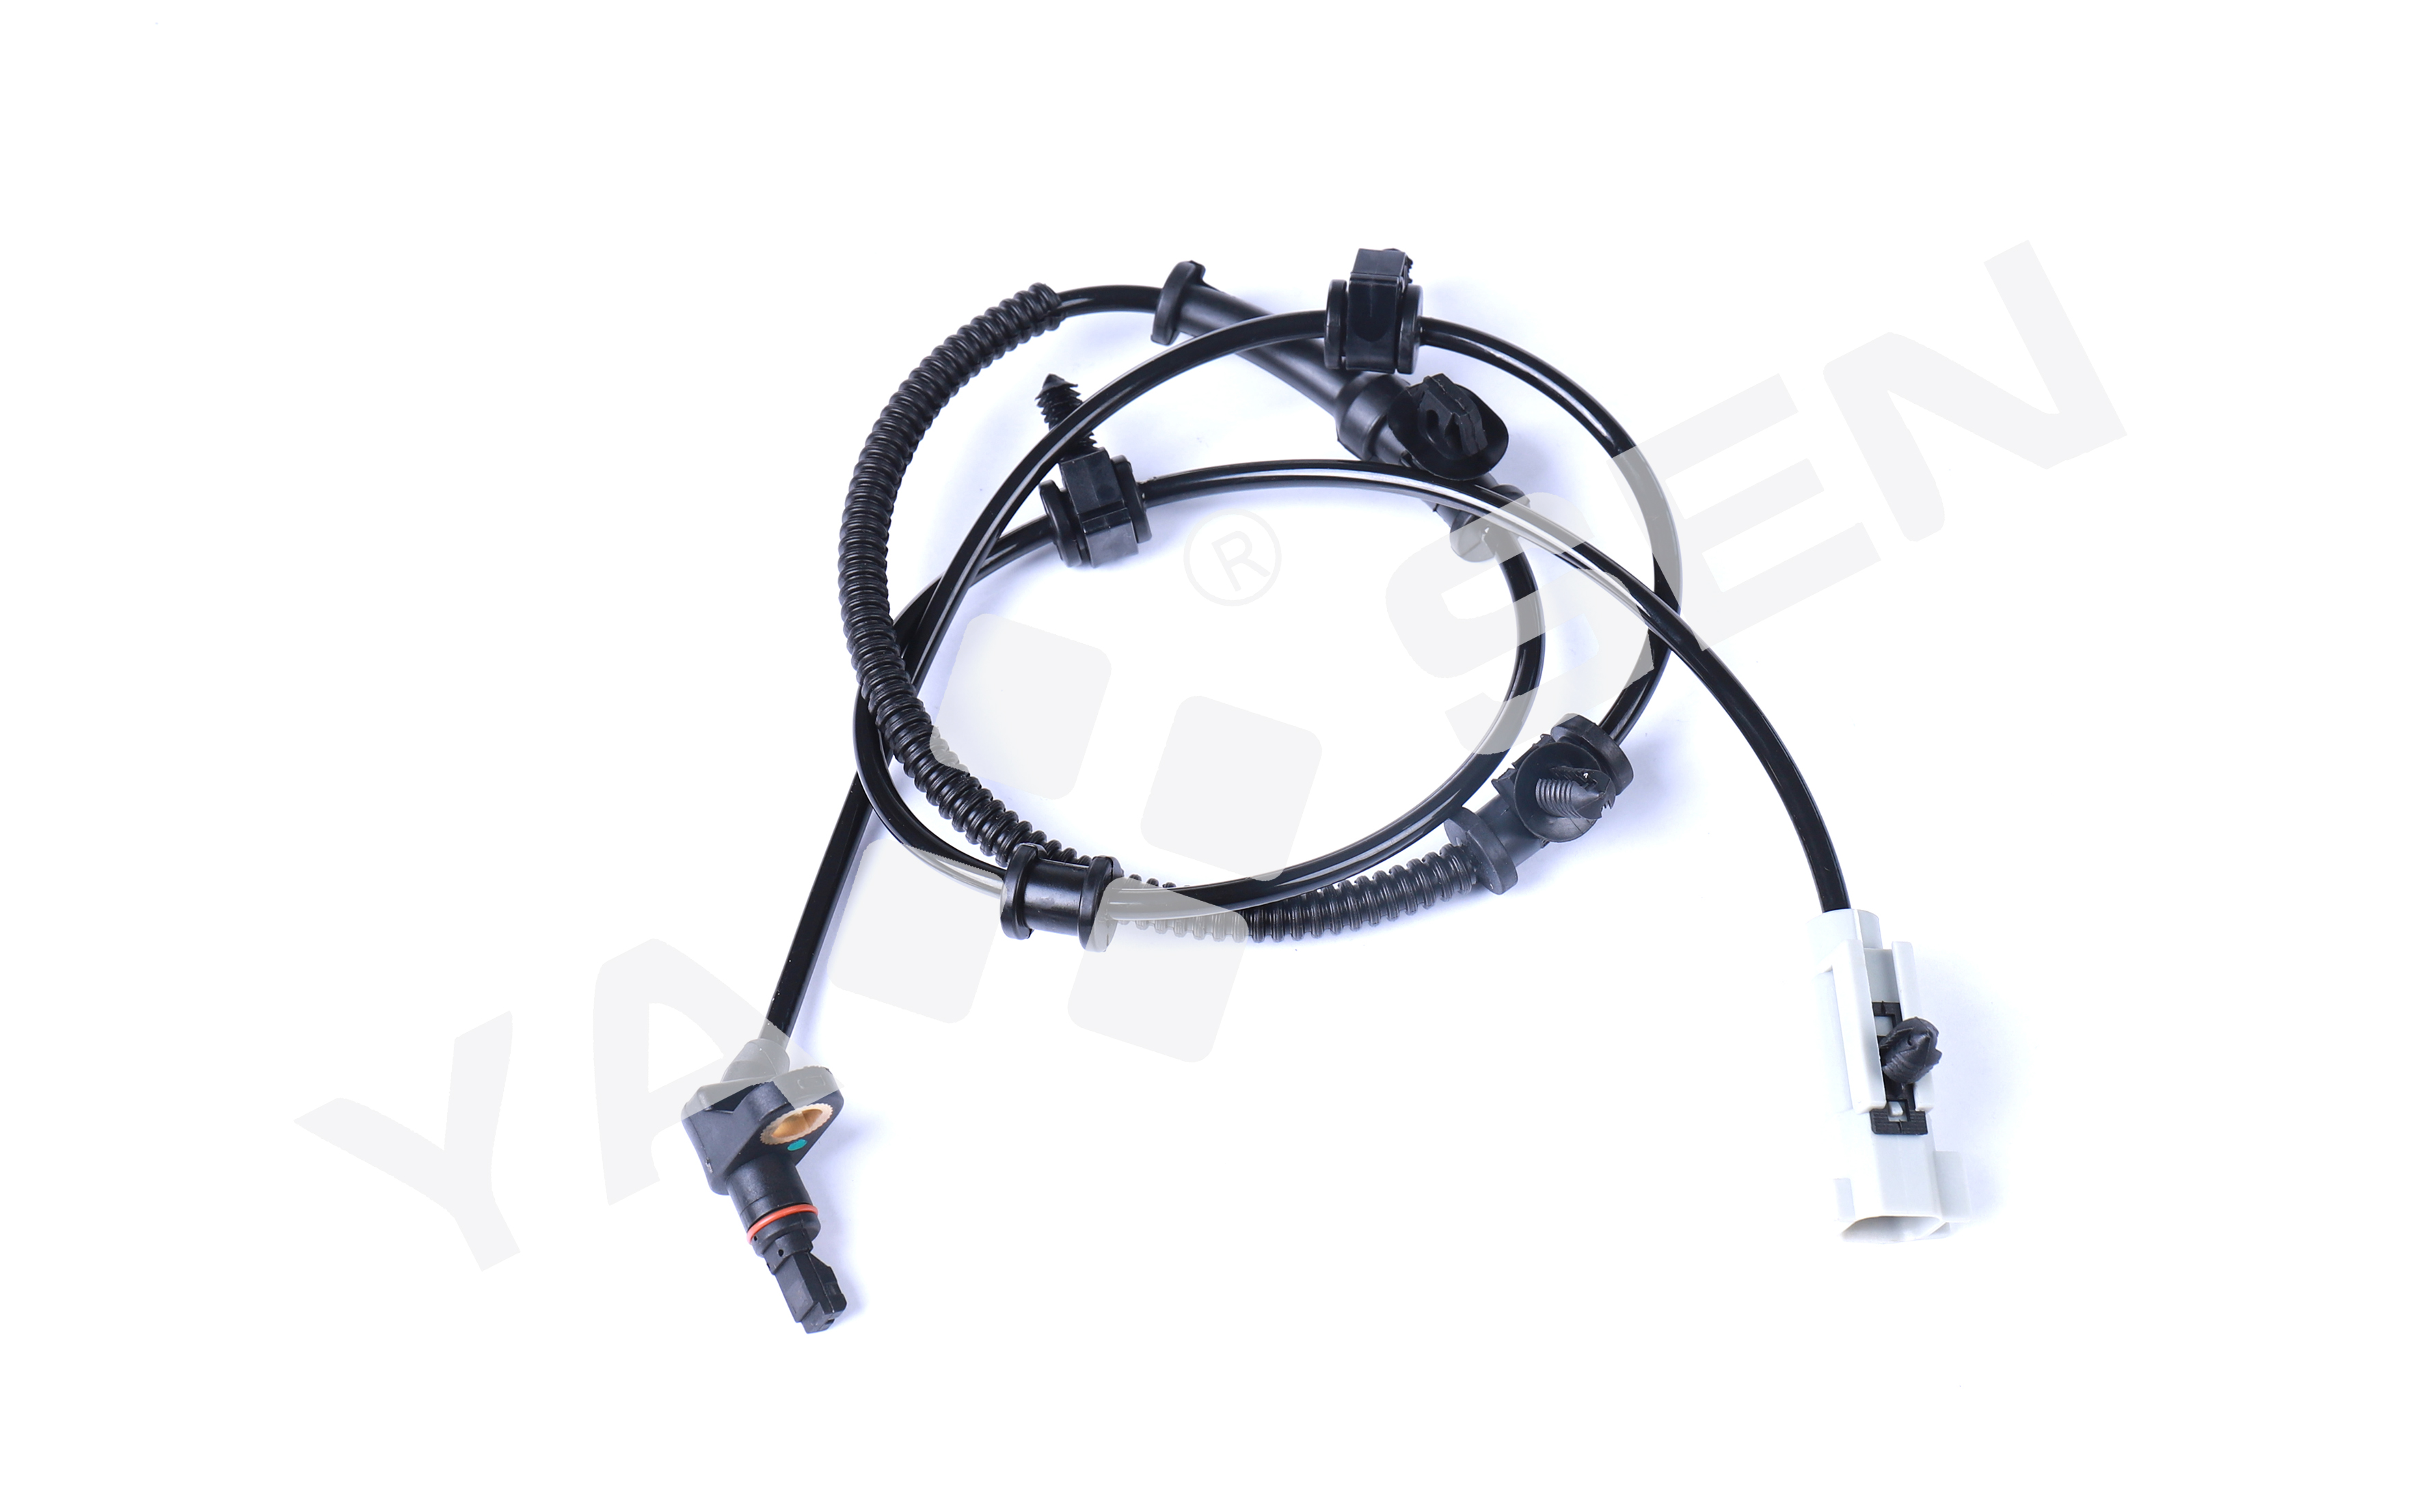 ABS Wheel Speed Sensor for JEEP/FORD, 56044144AC 5S7092 SU8584 ALS2113 ABS738 56044144AD 56044144AB